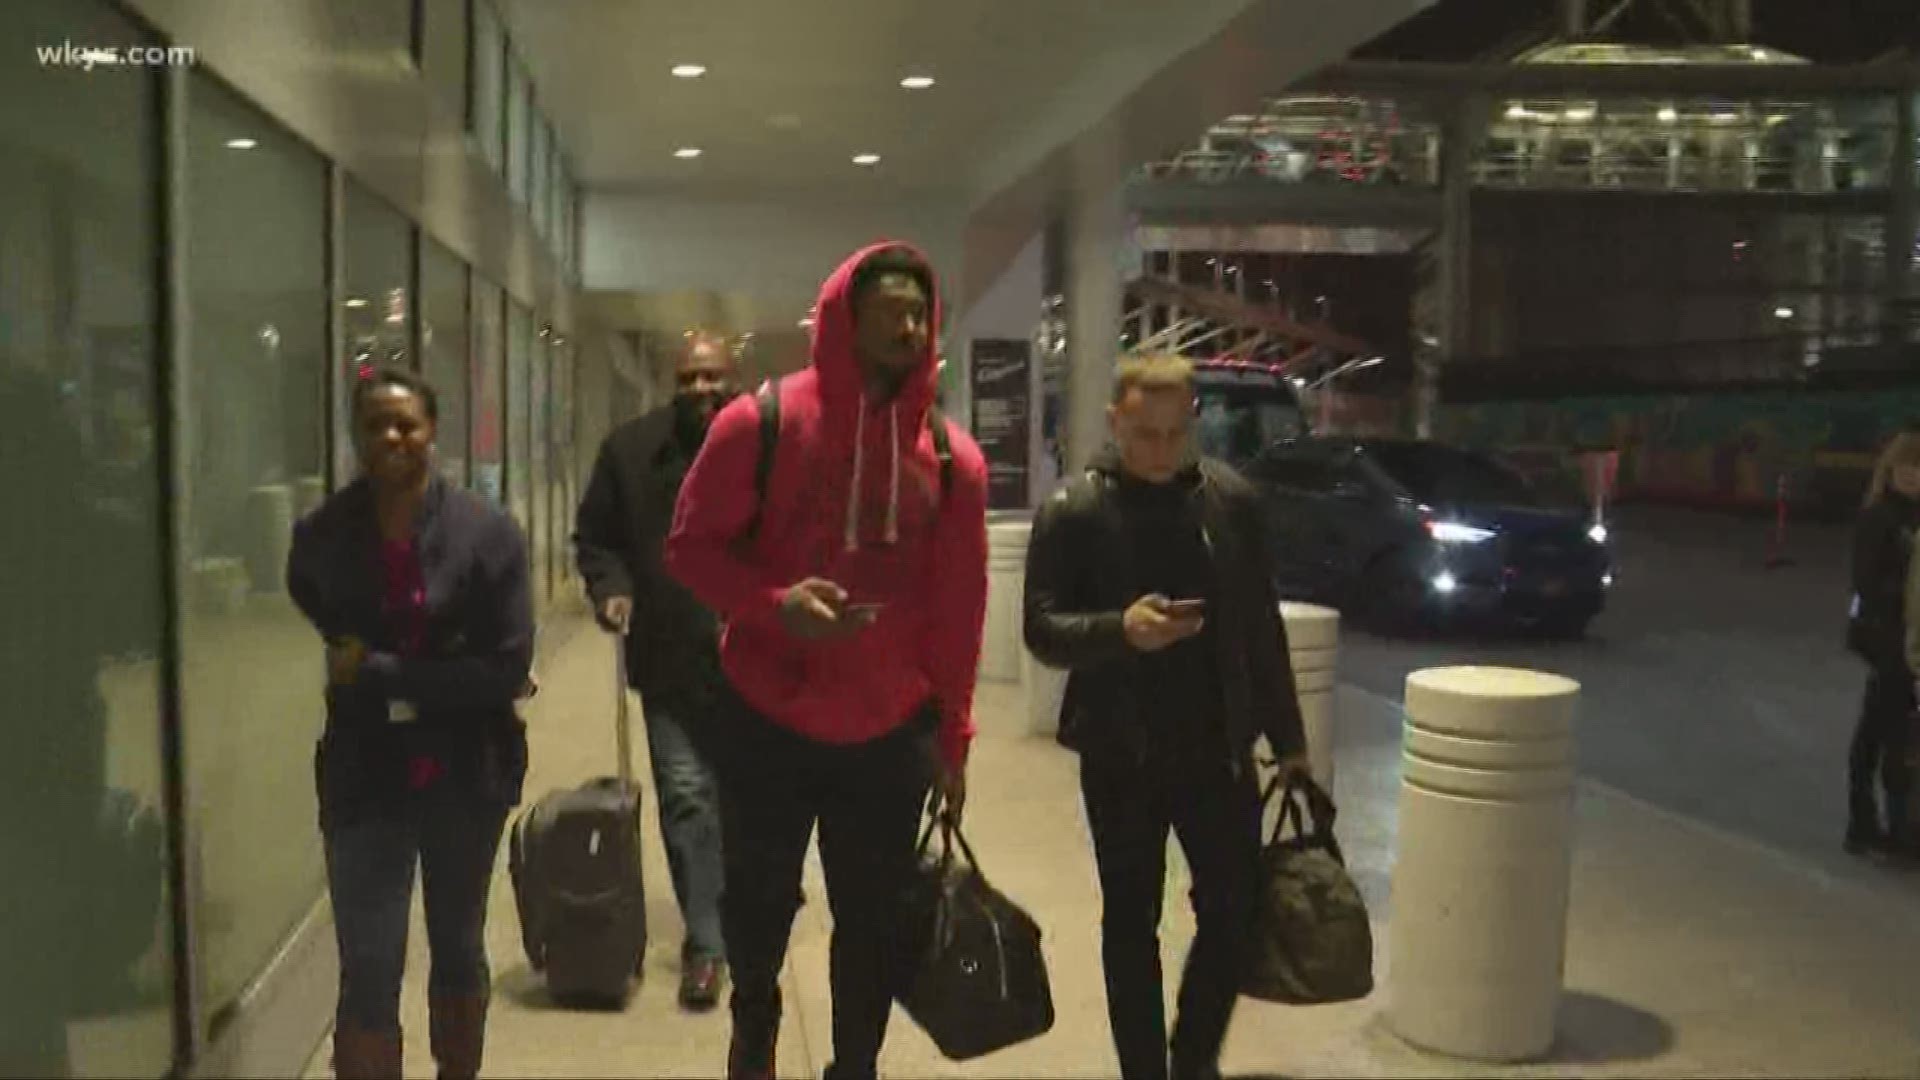 Cleveland Browns defensive end Myles Garrett is back in Cleveland after his appeal hearing in New York Wednesday.